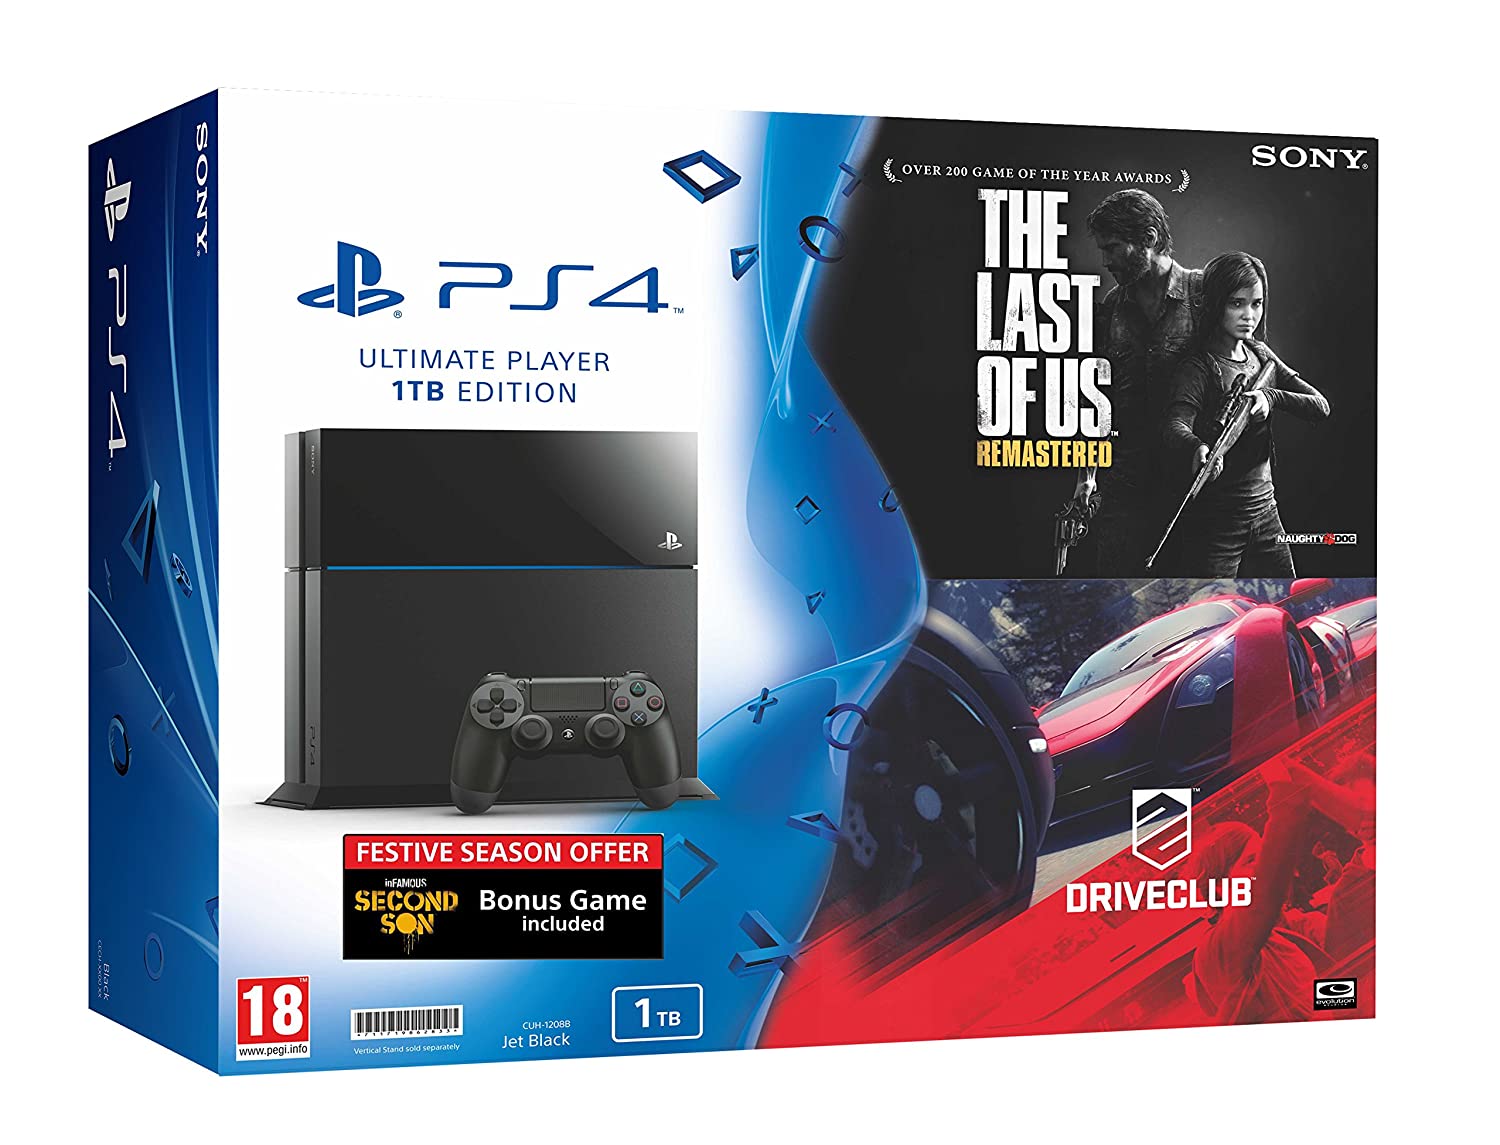 Ps4 ultimate edition. Ps4 Ultimate Edition 1tb. DRIVECLUB Sony ps4 диск. Ps4 Pro 1tb версия программы. Диск gt 7 ps4 Unboxing.